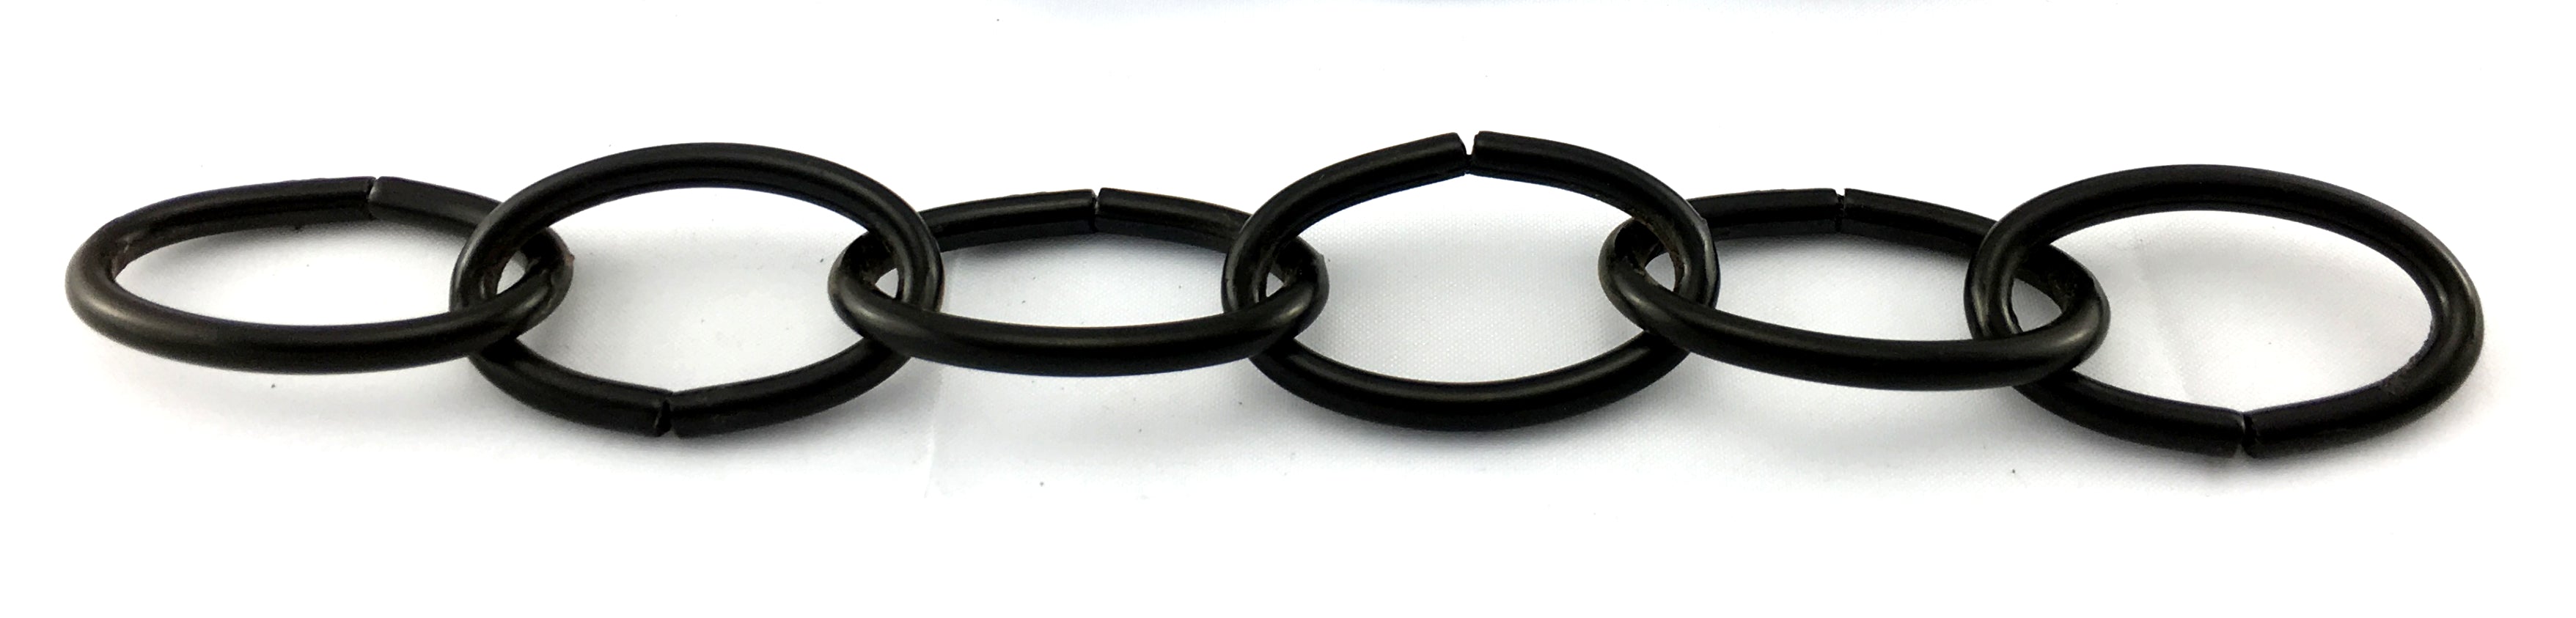 Decorative Lighting Chain in Black, size 3.8mm. Order by the metre. Melbourne and Australia wide